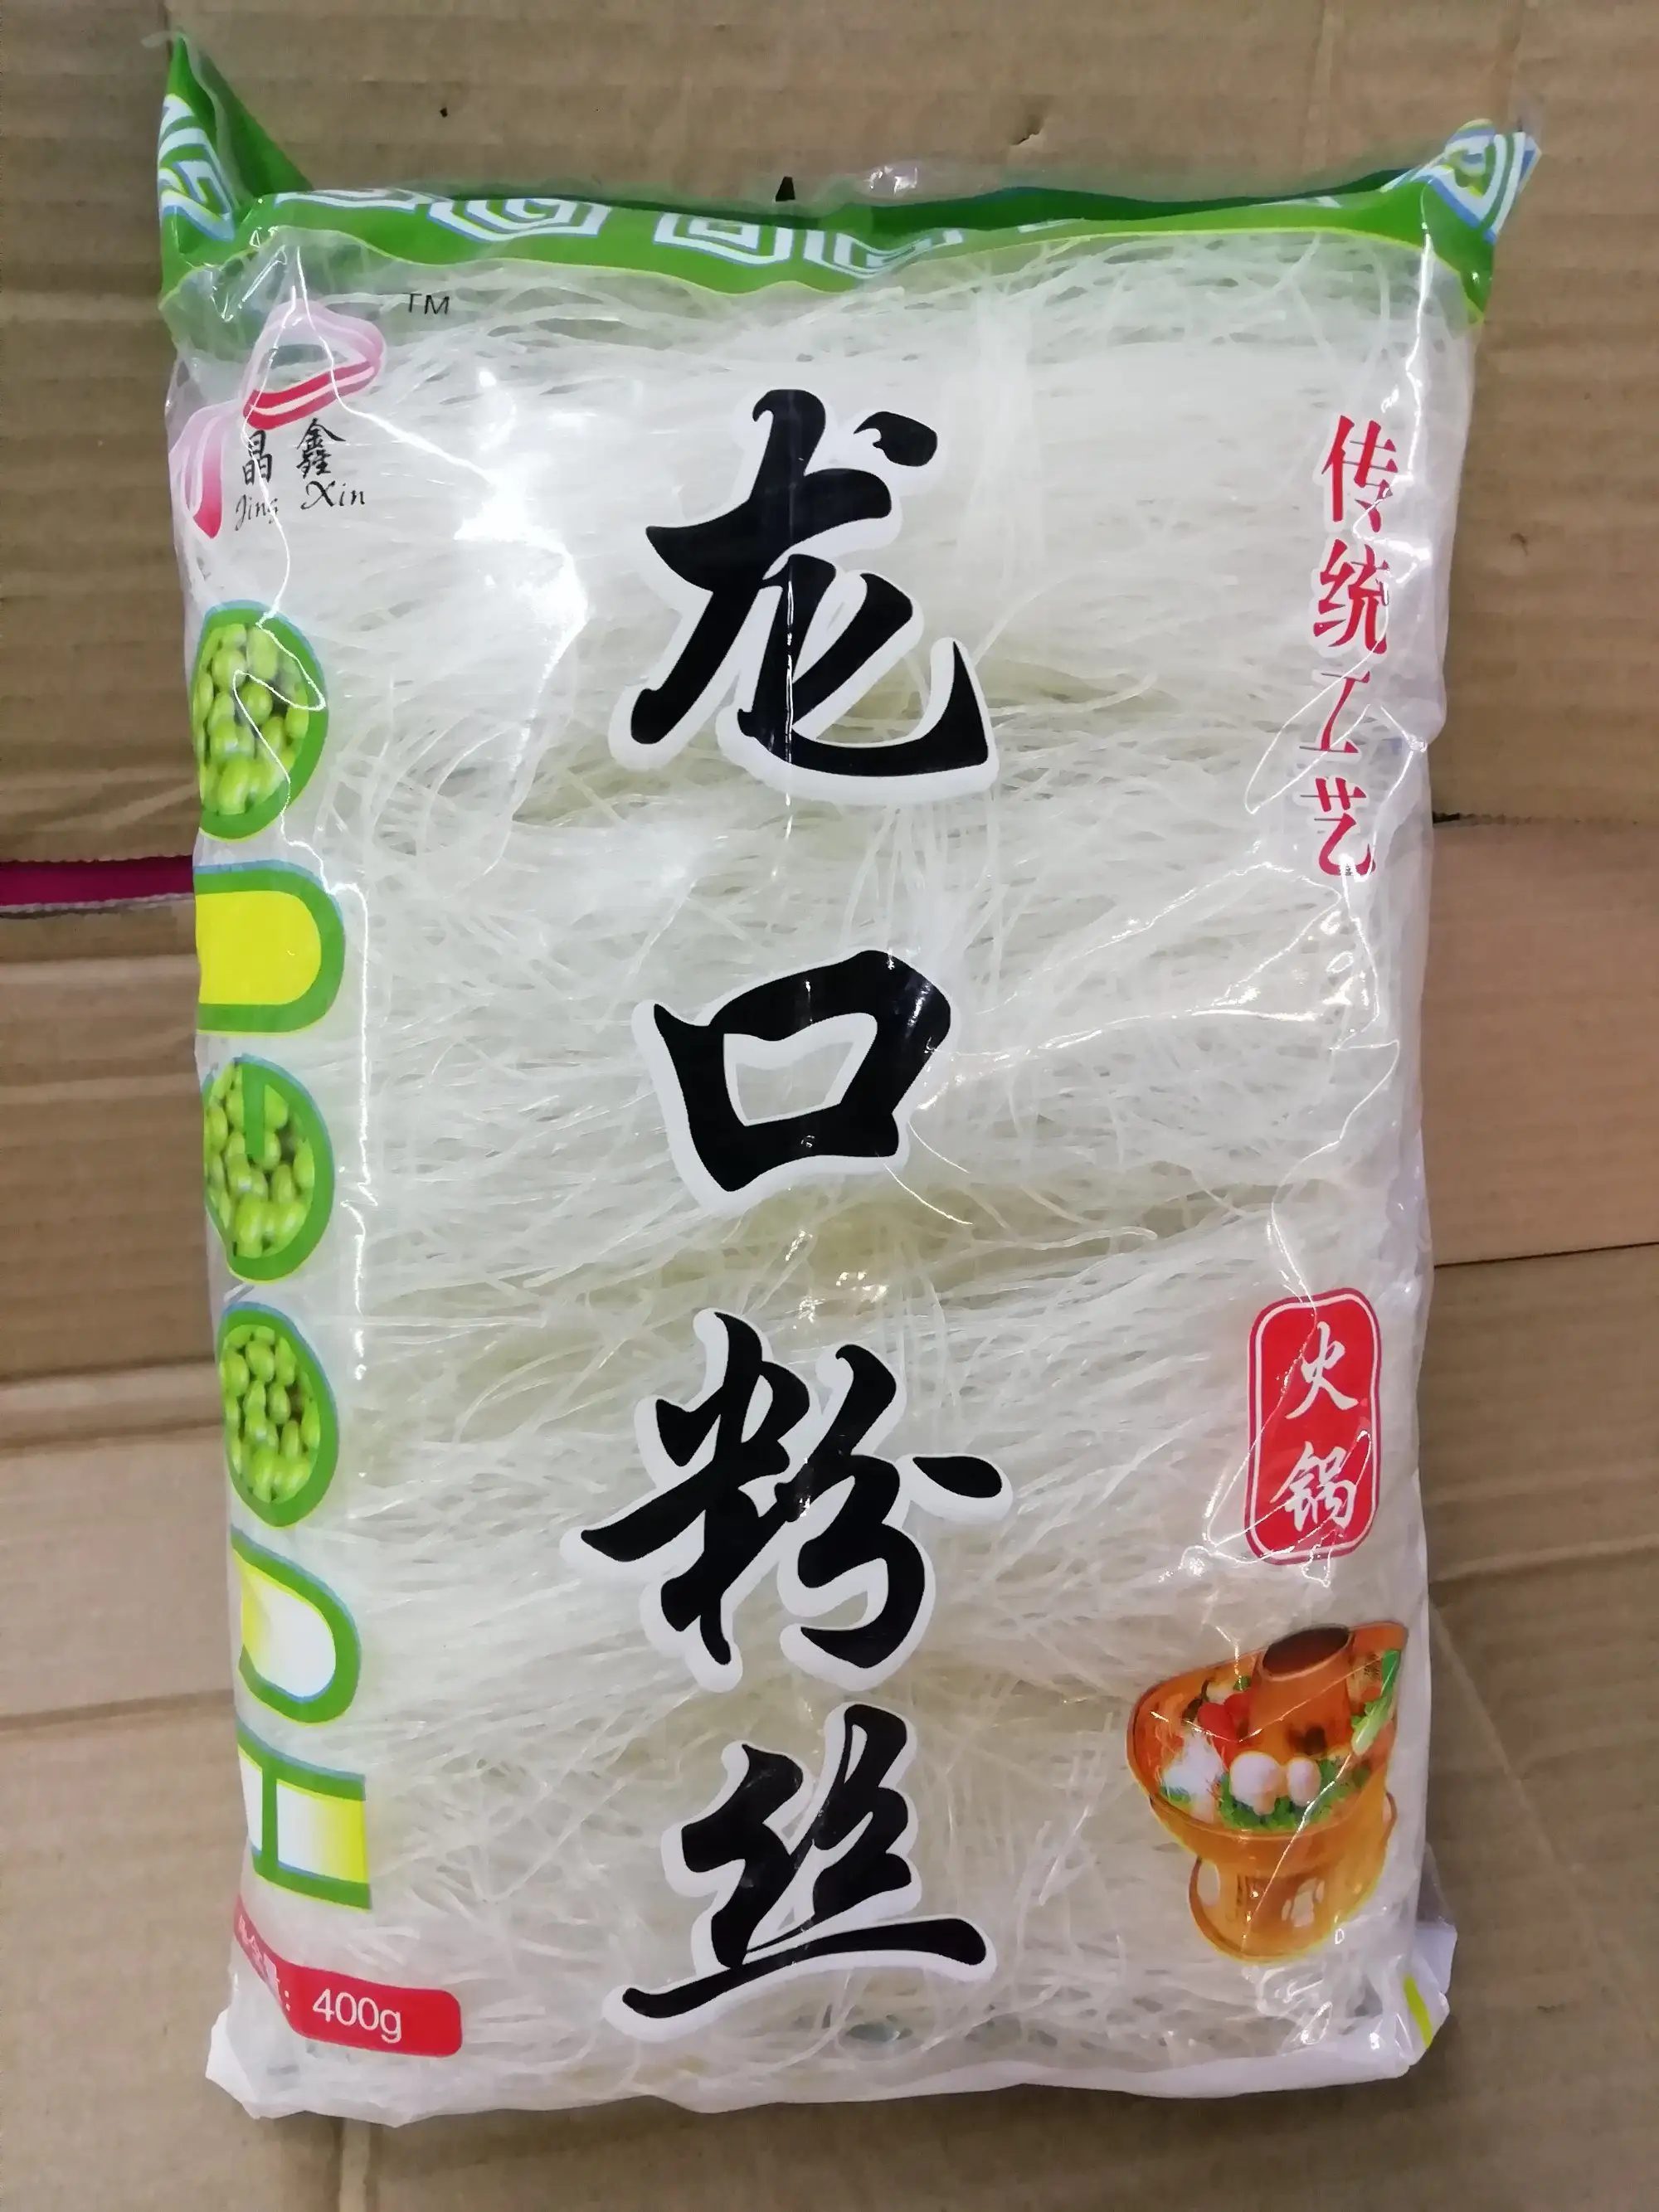 What kind of vermicelli to use?